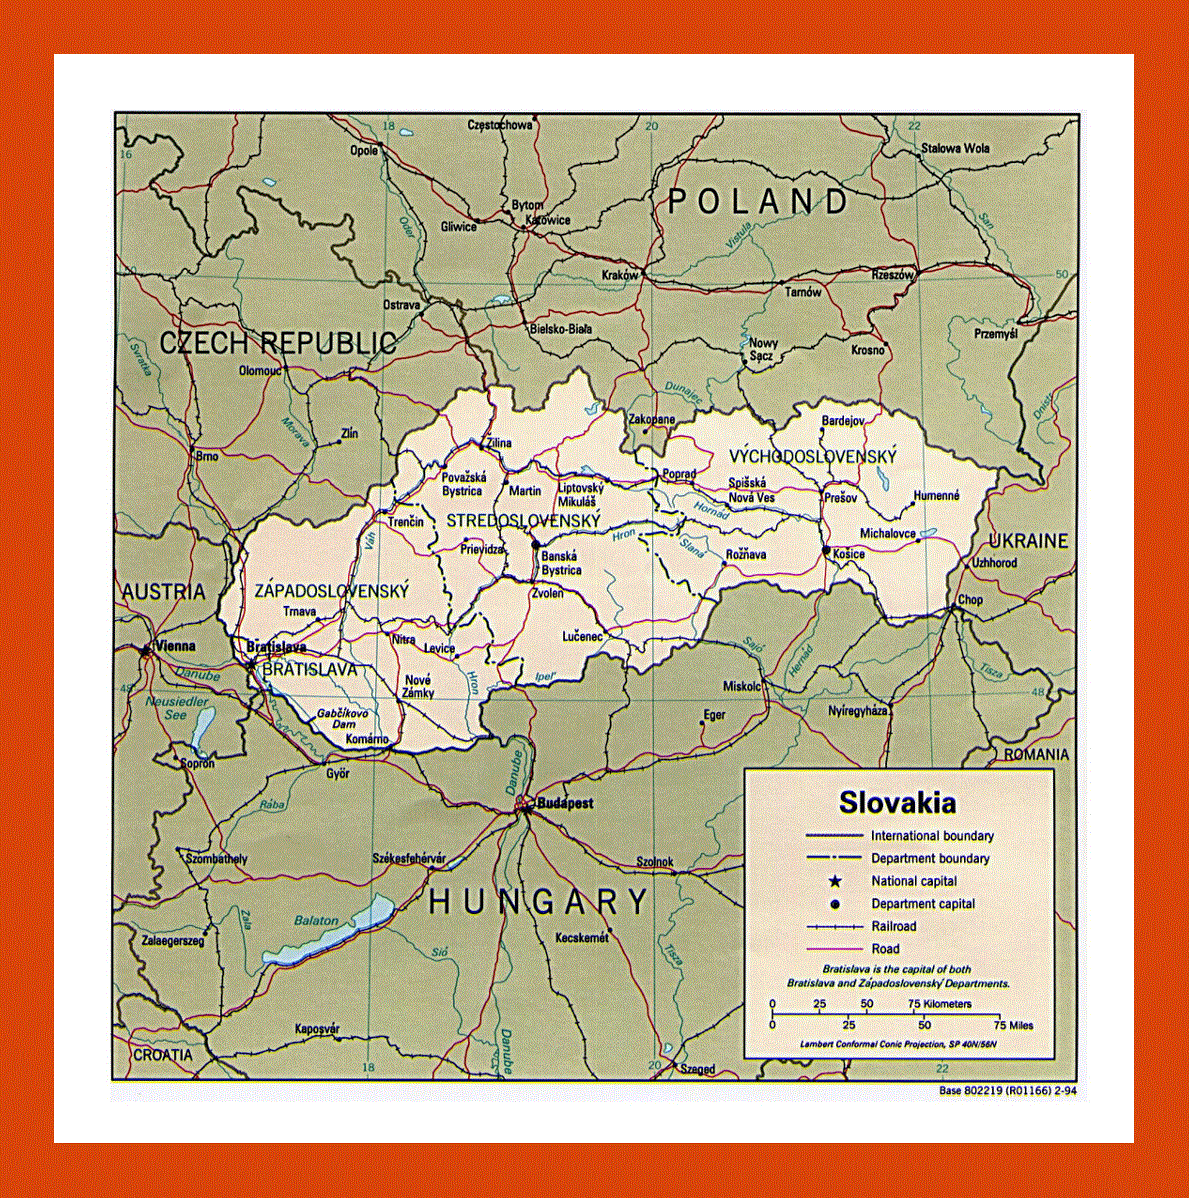 Political and administrative map of Slovakia - 1994